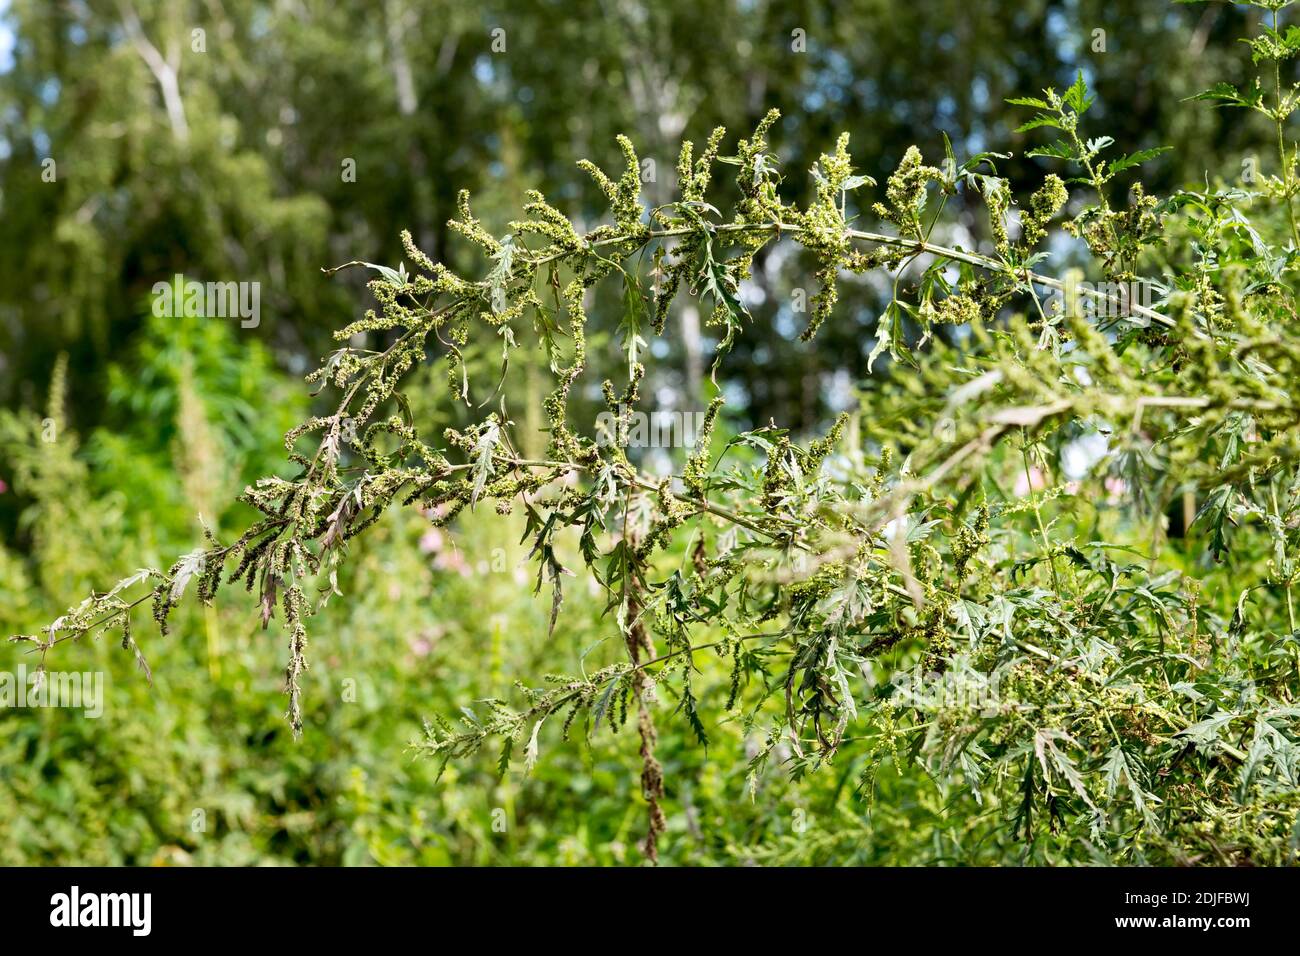 Stalks of Nettle burning (lat.Urtica cannabina) bent under the weight of seeds in a birch grove against the backdrop of trees, in summer. Stock Photo